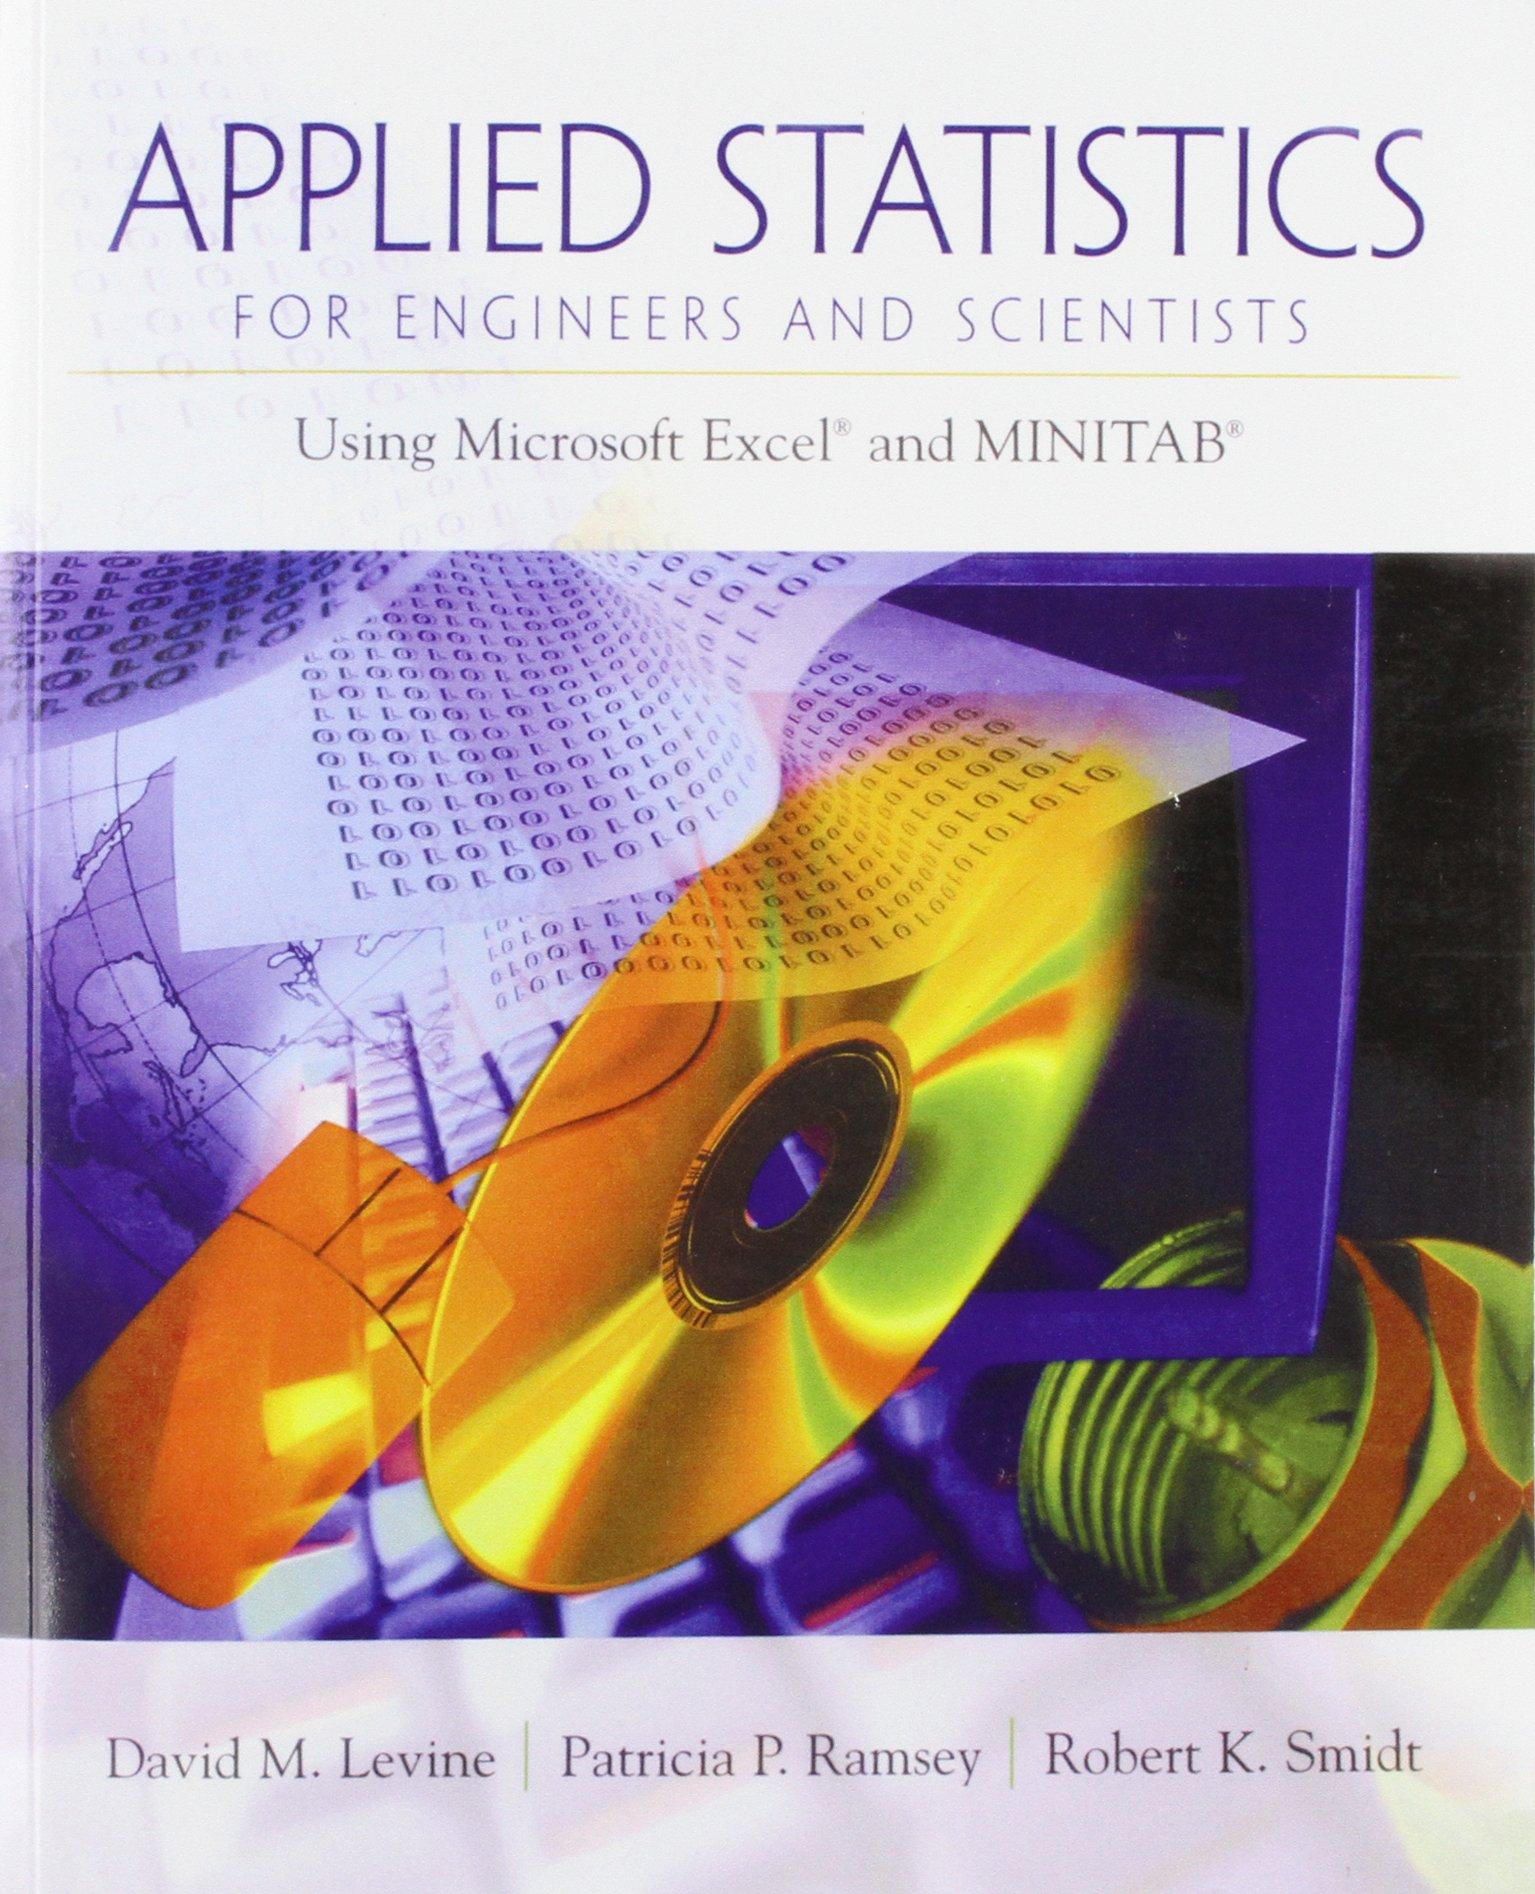 applied statistics for engineers and scientists 1st edition david levine, patricia ramsey, robert smidt